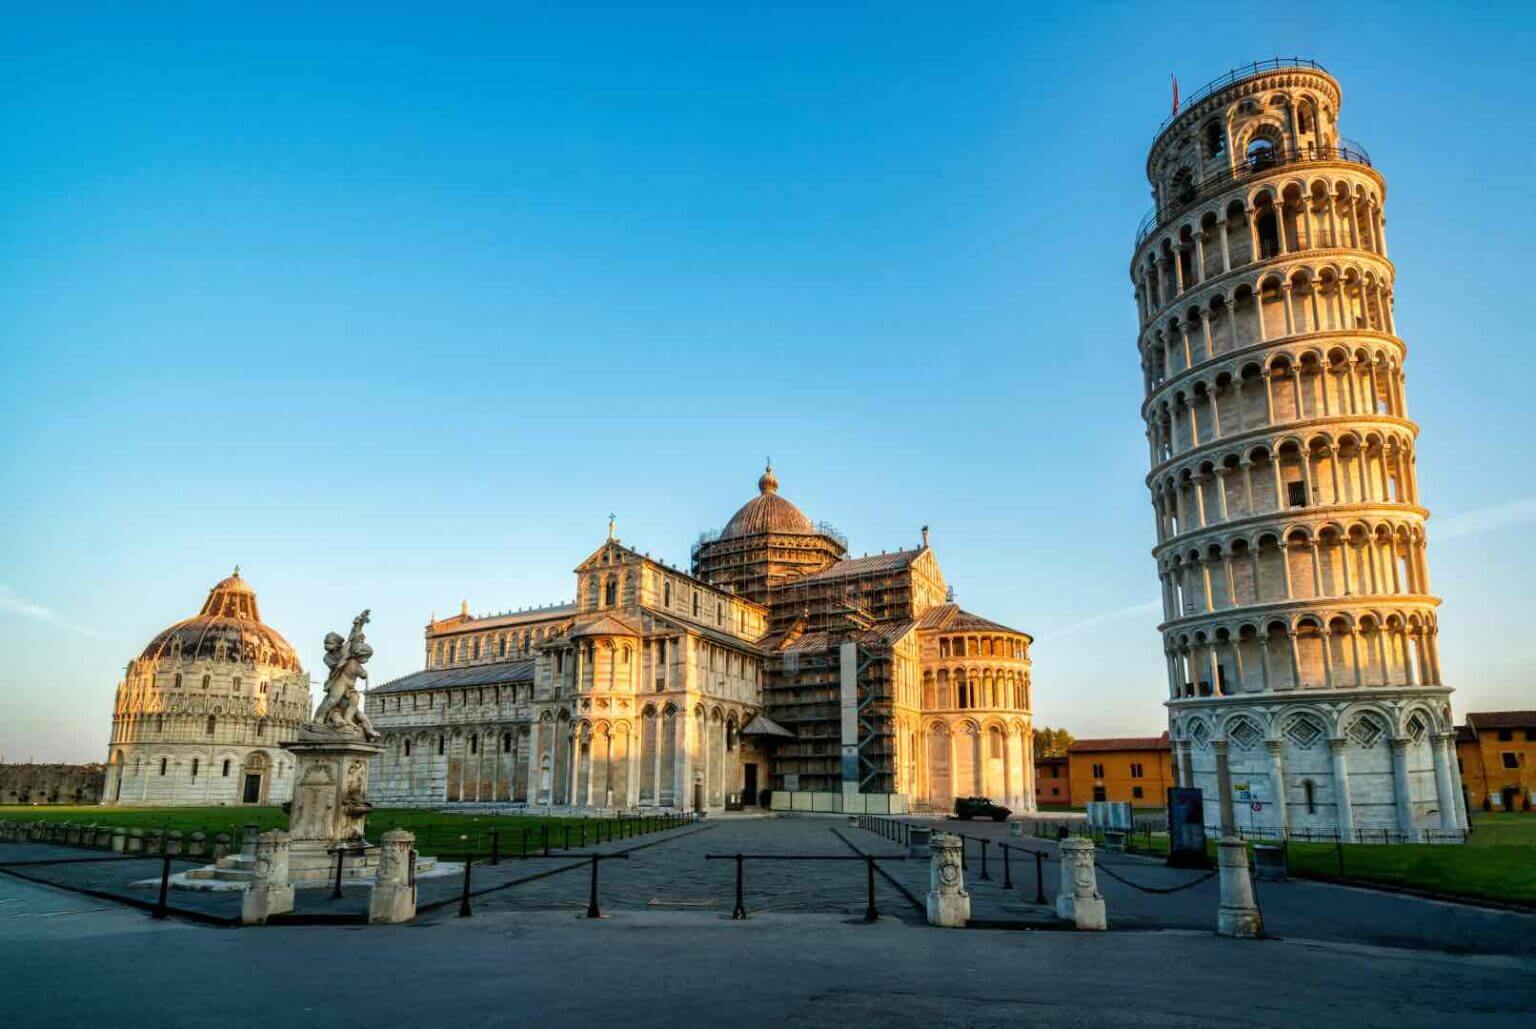 Leaning tower of Pisa - Travel Facts